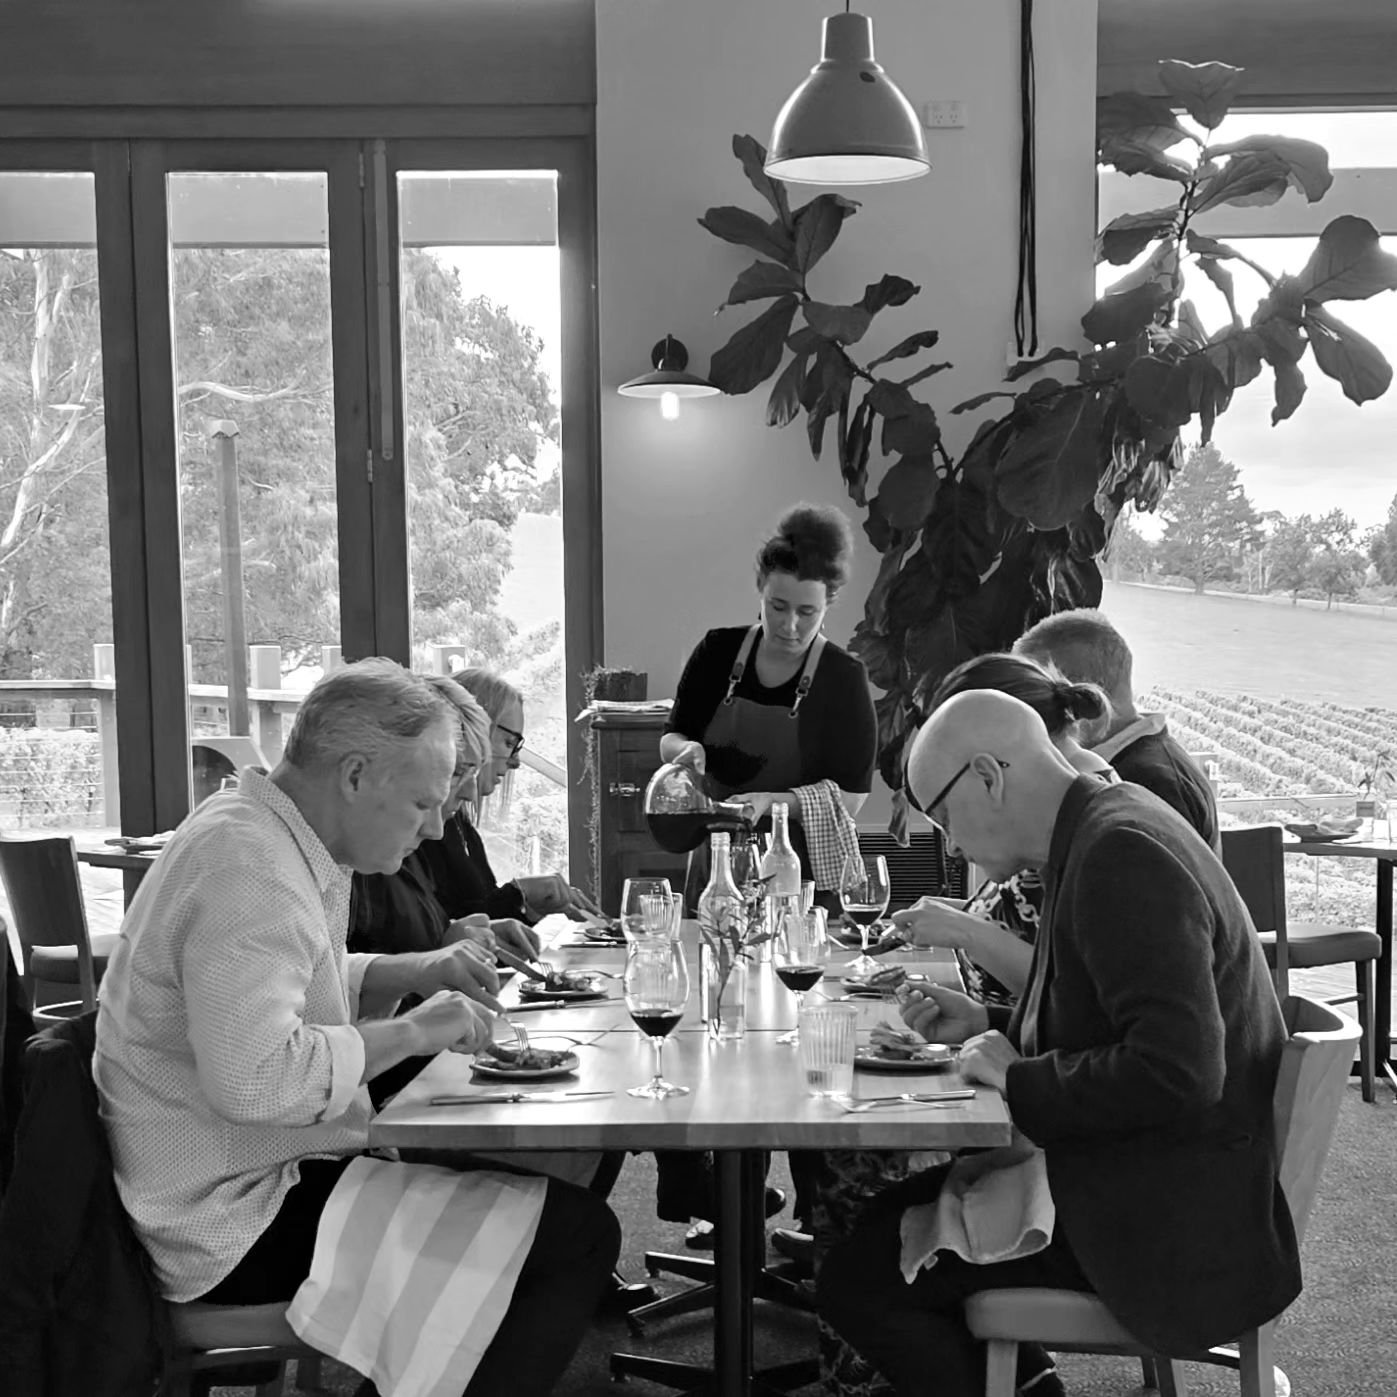 The concept of Hogget Kitchen was created over many musings during long lunches, with good friends who share our passion for seasonal, local, slow food. Who are you having lunch with this weekend? 🍷

#friendsandfamily #weekend #longlunch #dining #di